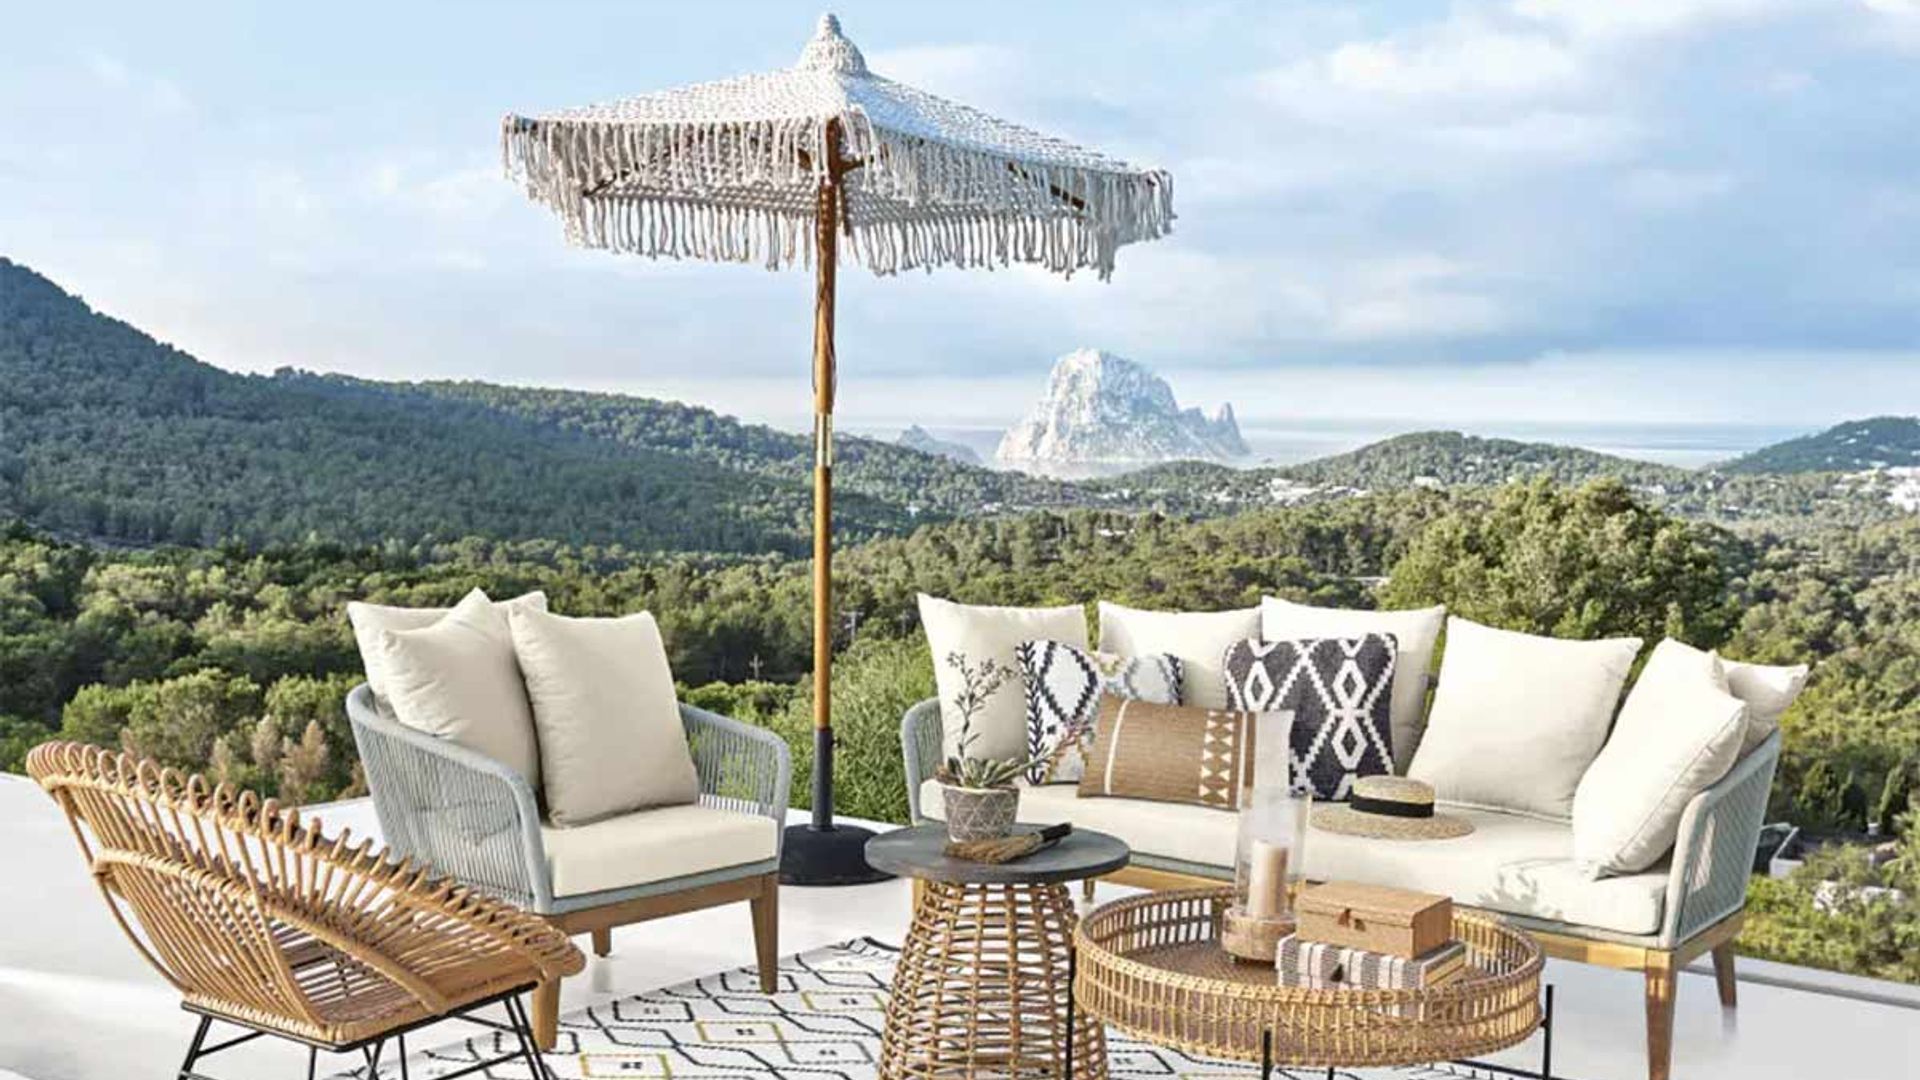 10 parasols for the garden that will elevate your outdoor space